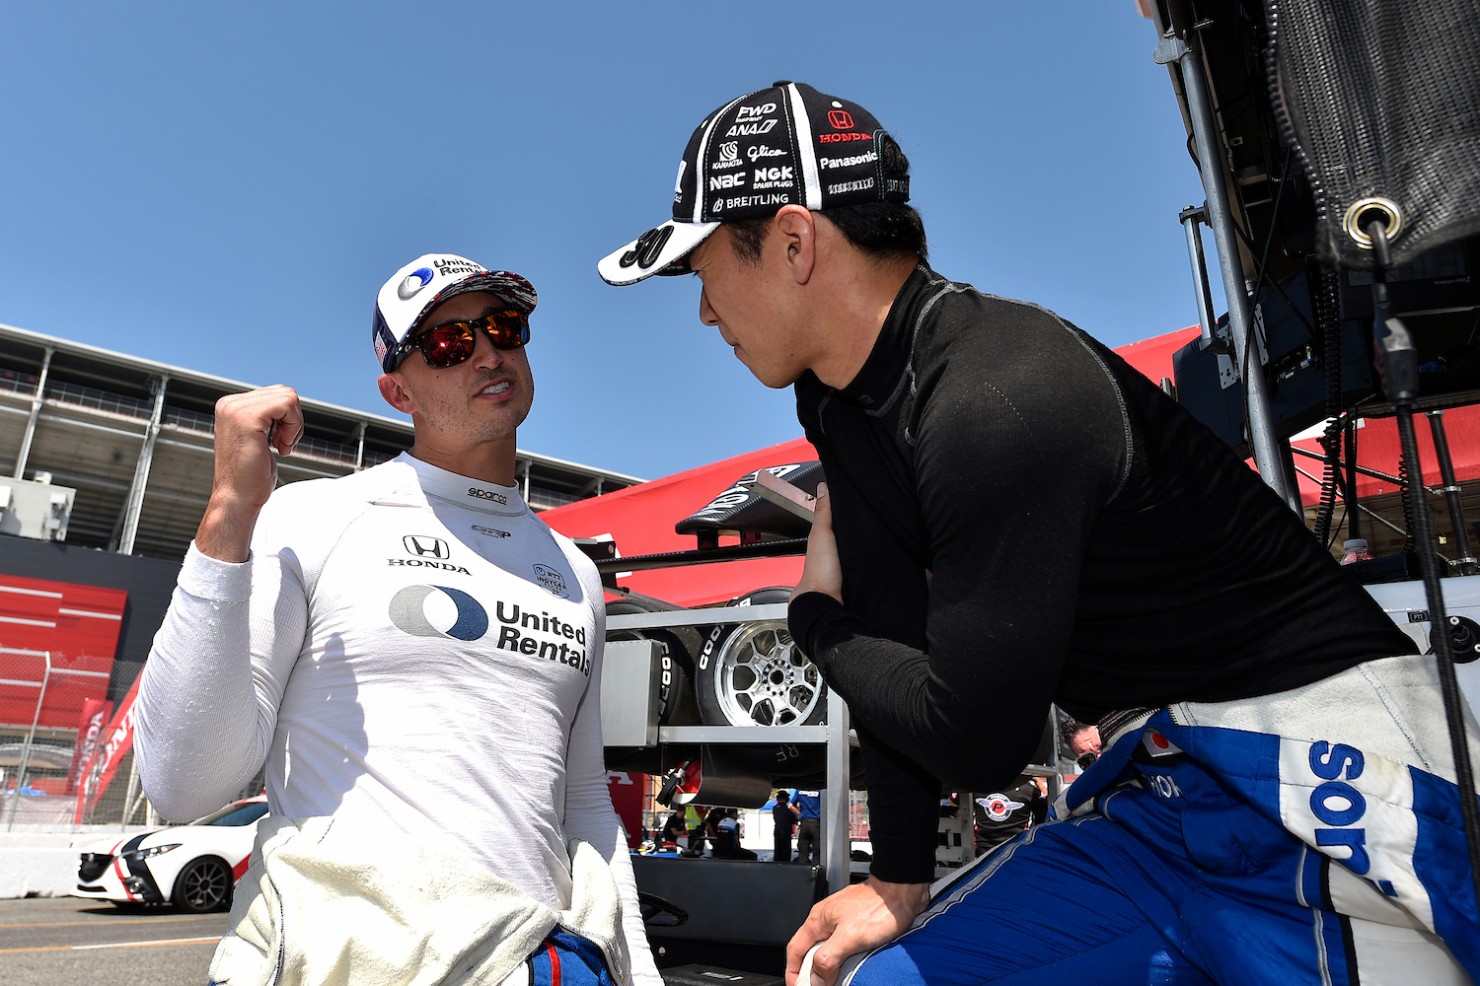 Rahal and Sato confident of competitive showing at Pocono Raceway - Motorsport Technology